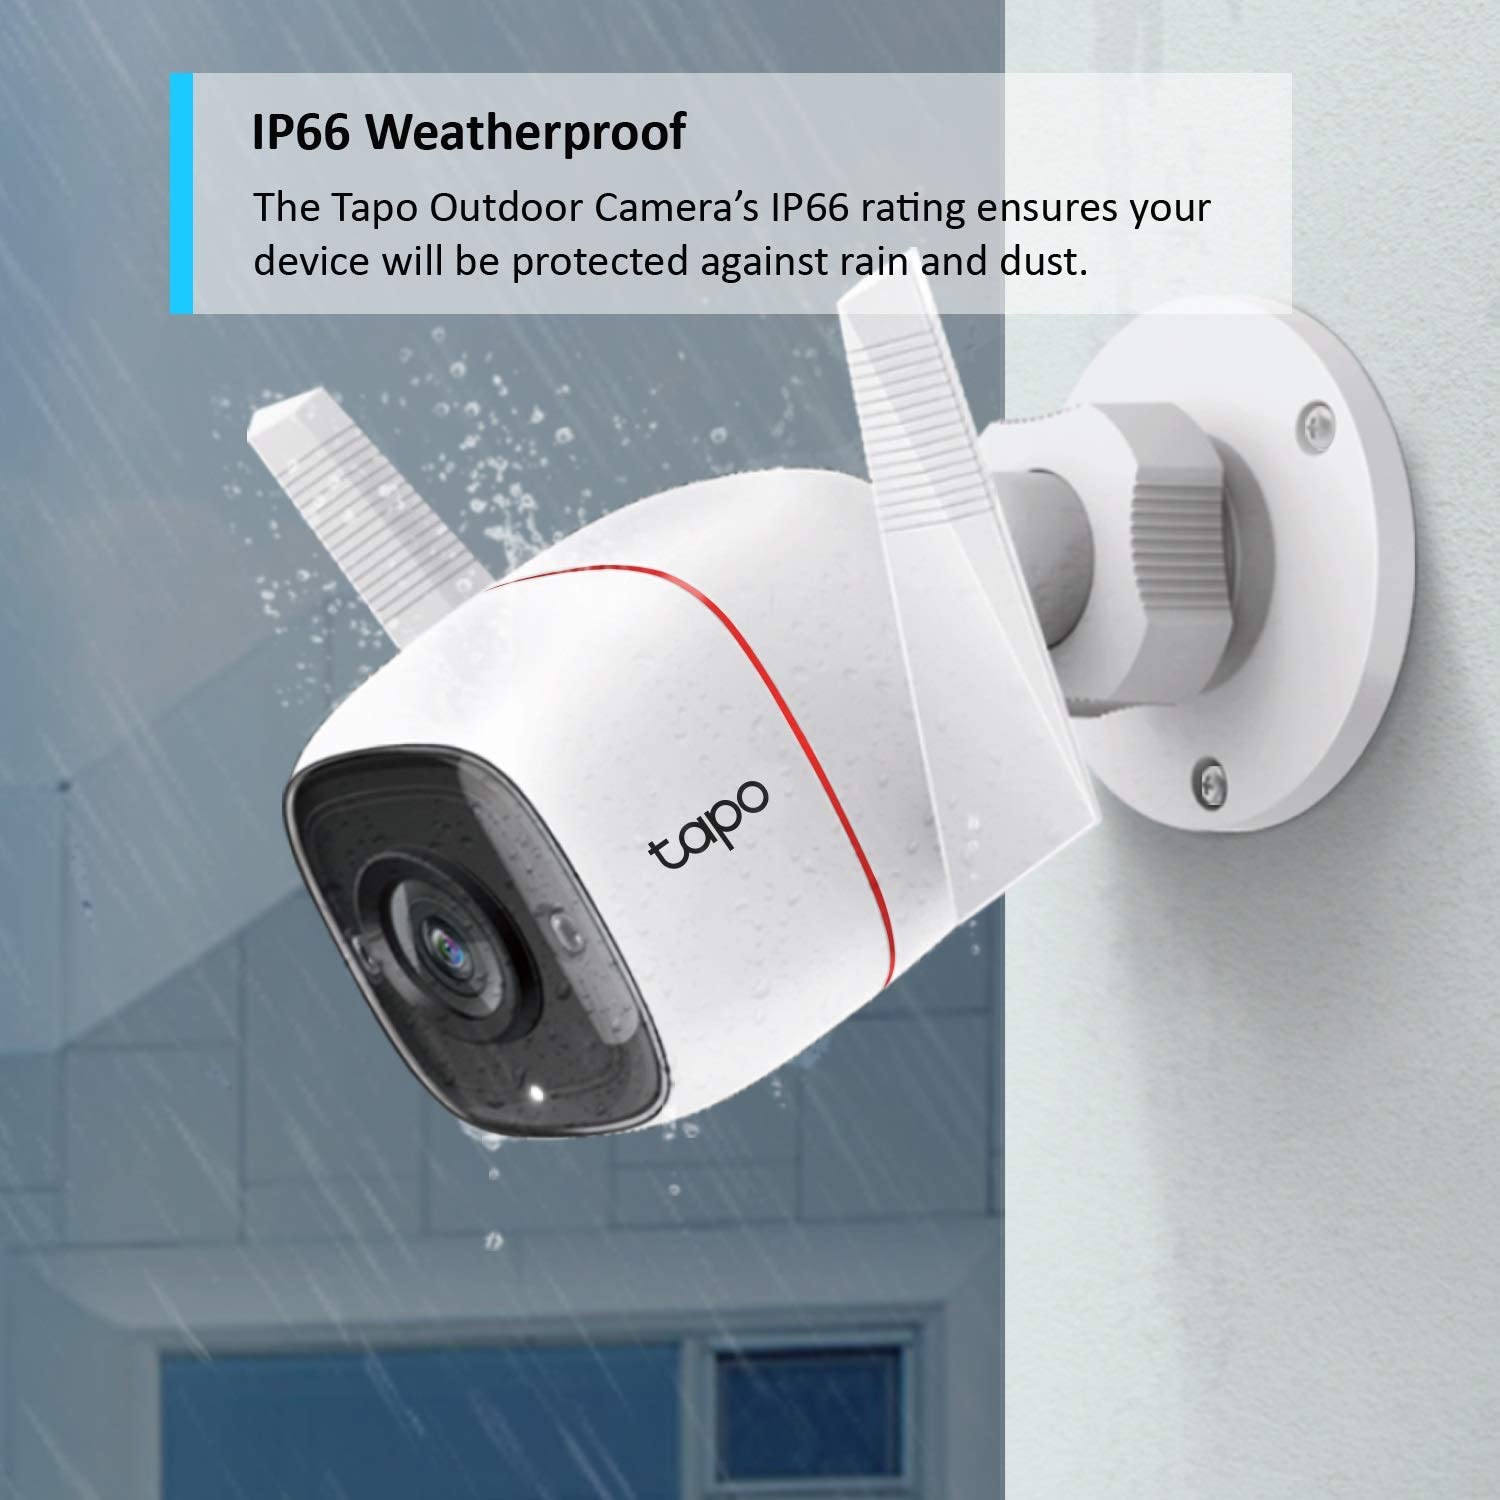 Tapo C310 Twin Pack Outdoor Security Wi-Fi Smart Camera 3MP, Night Vision